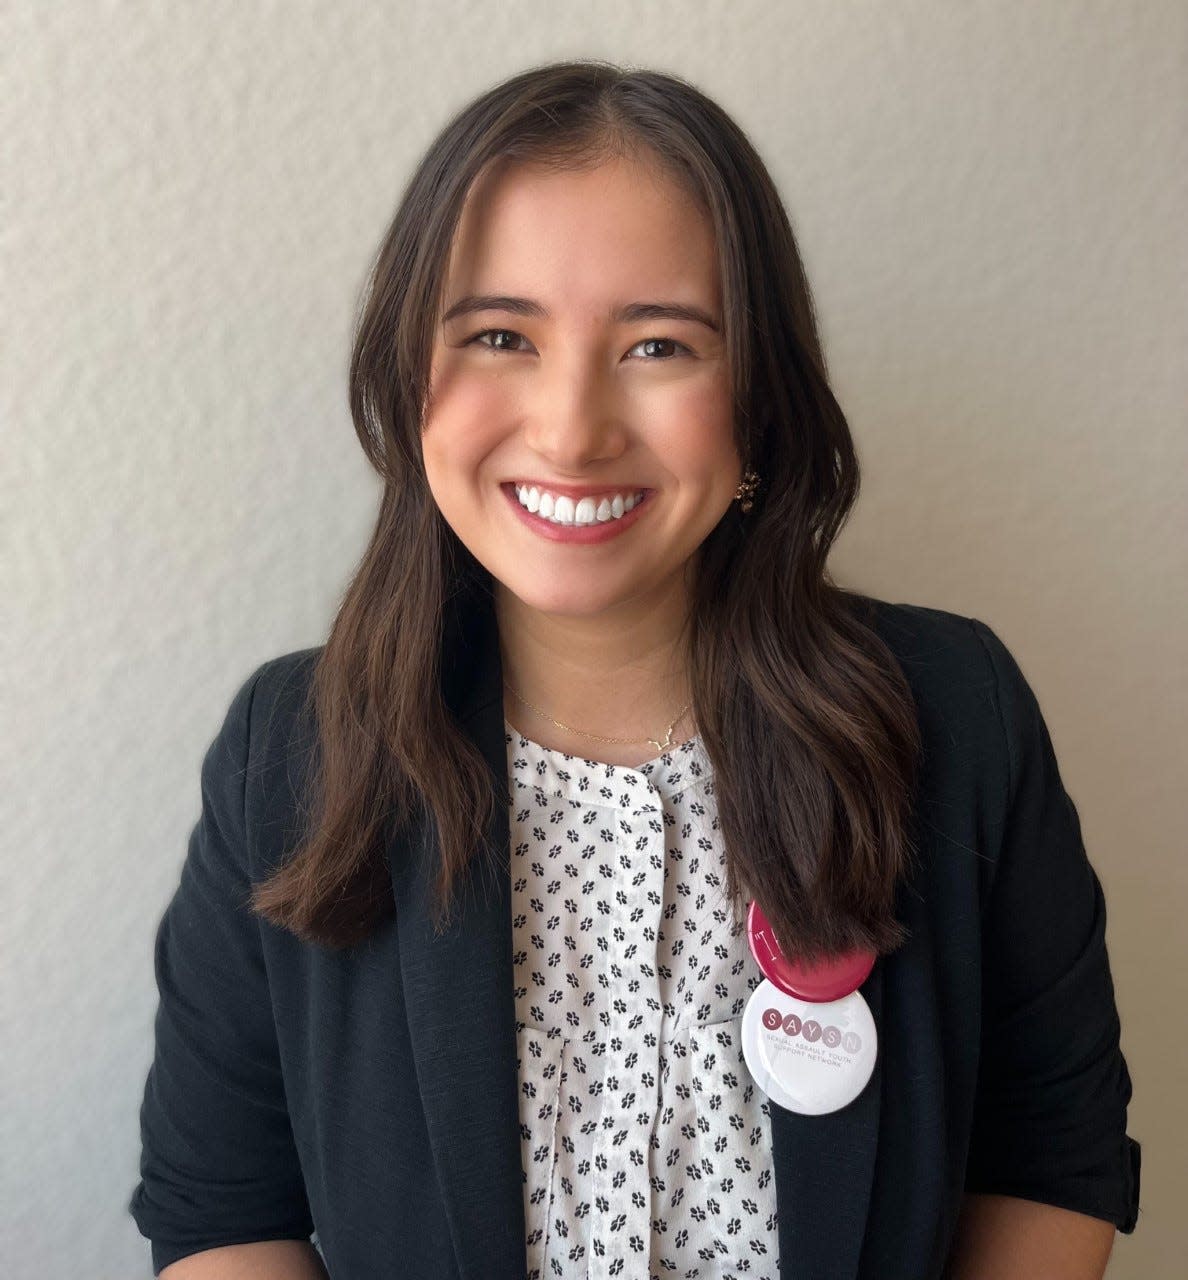 Abrianna Morales, 20, of Las Cruces was named a 2022 Truman Scholar among the 57 other college students chosen from across the country.